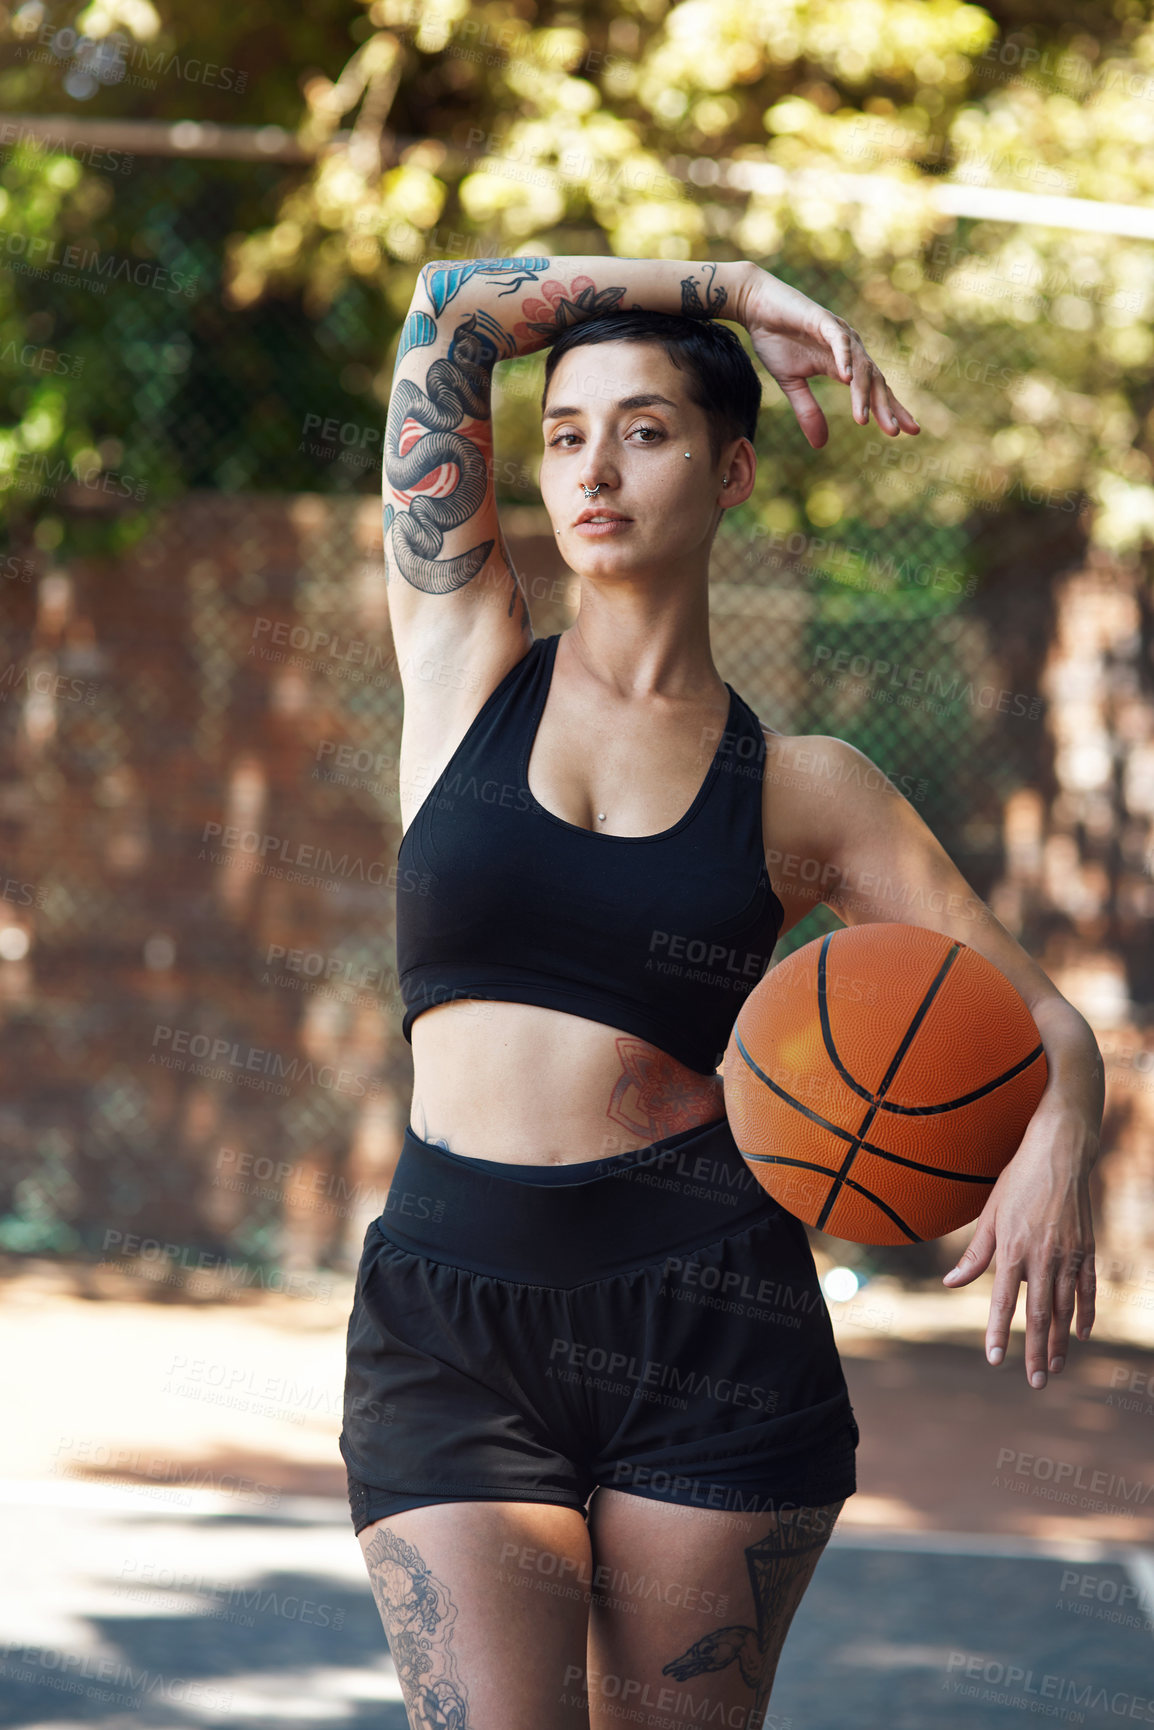 Buy stock photo Cropped portrait of an attractive young female athlete standing on the basketball court